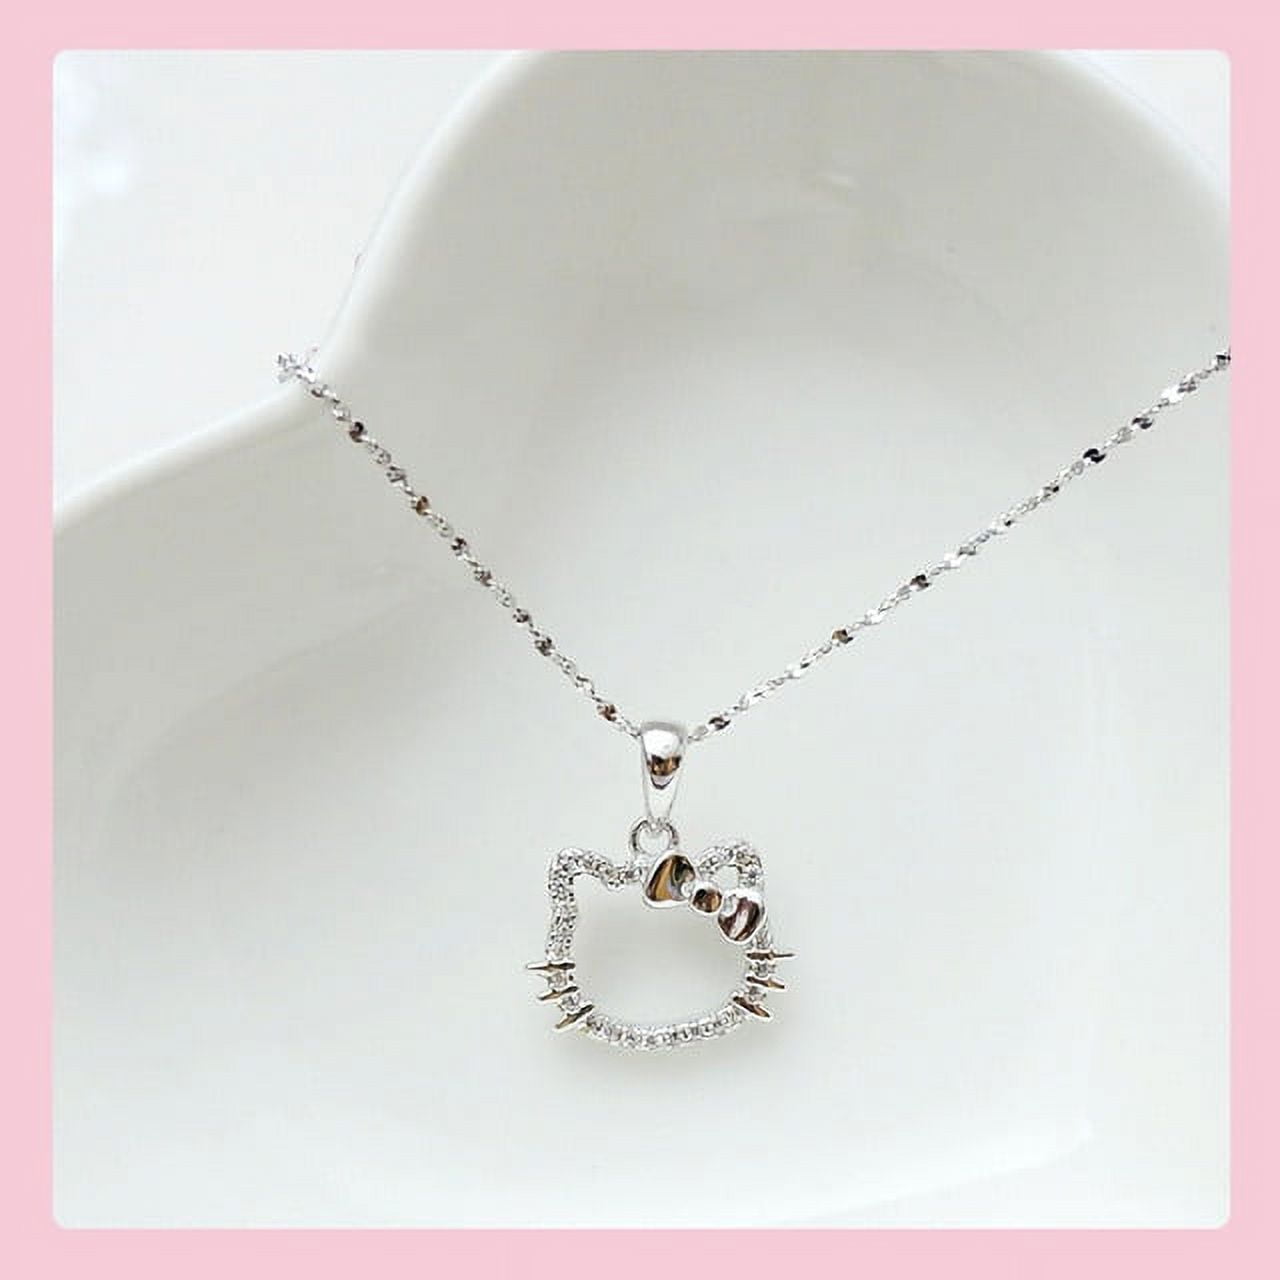 Hello Kitty Sanrio Necklace Silver Color Layer Shining Bling Women Clavicle  Chain Elegant Charm Wed Pendant Jewelry Gift